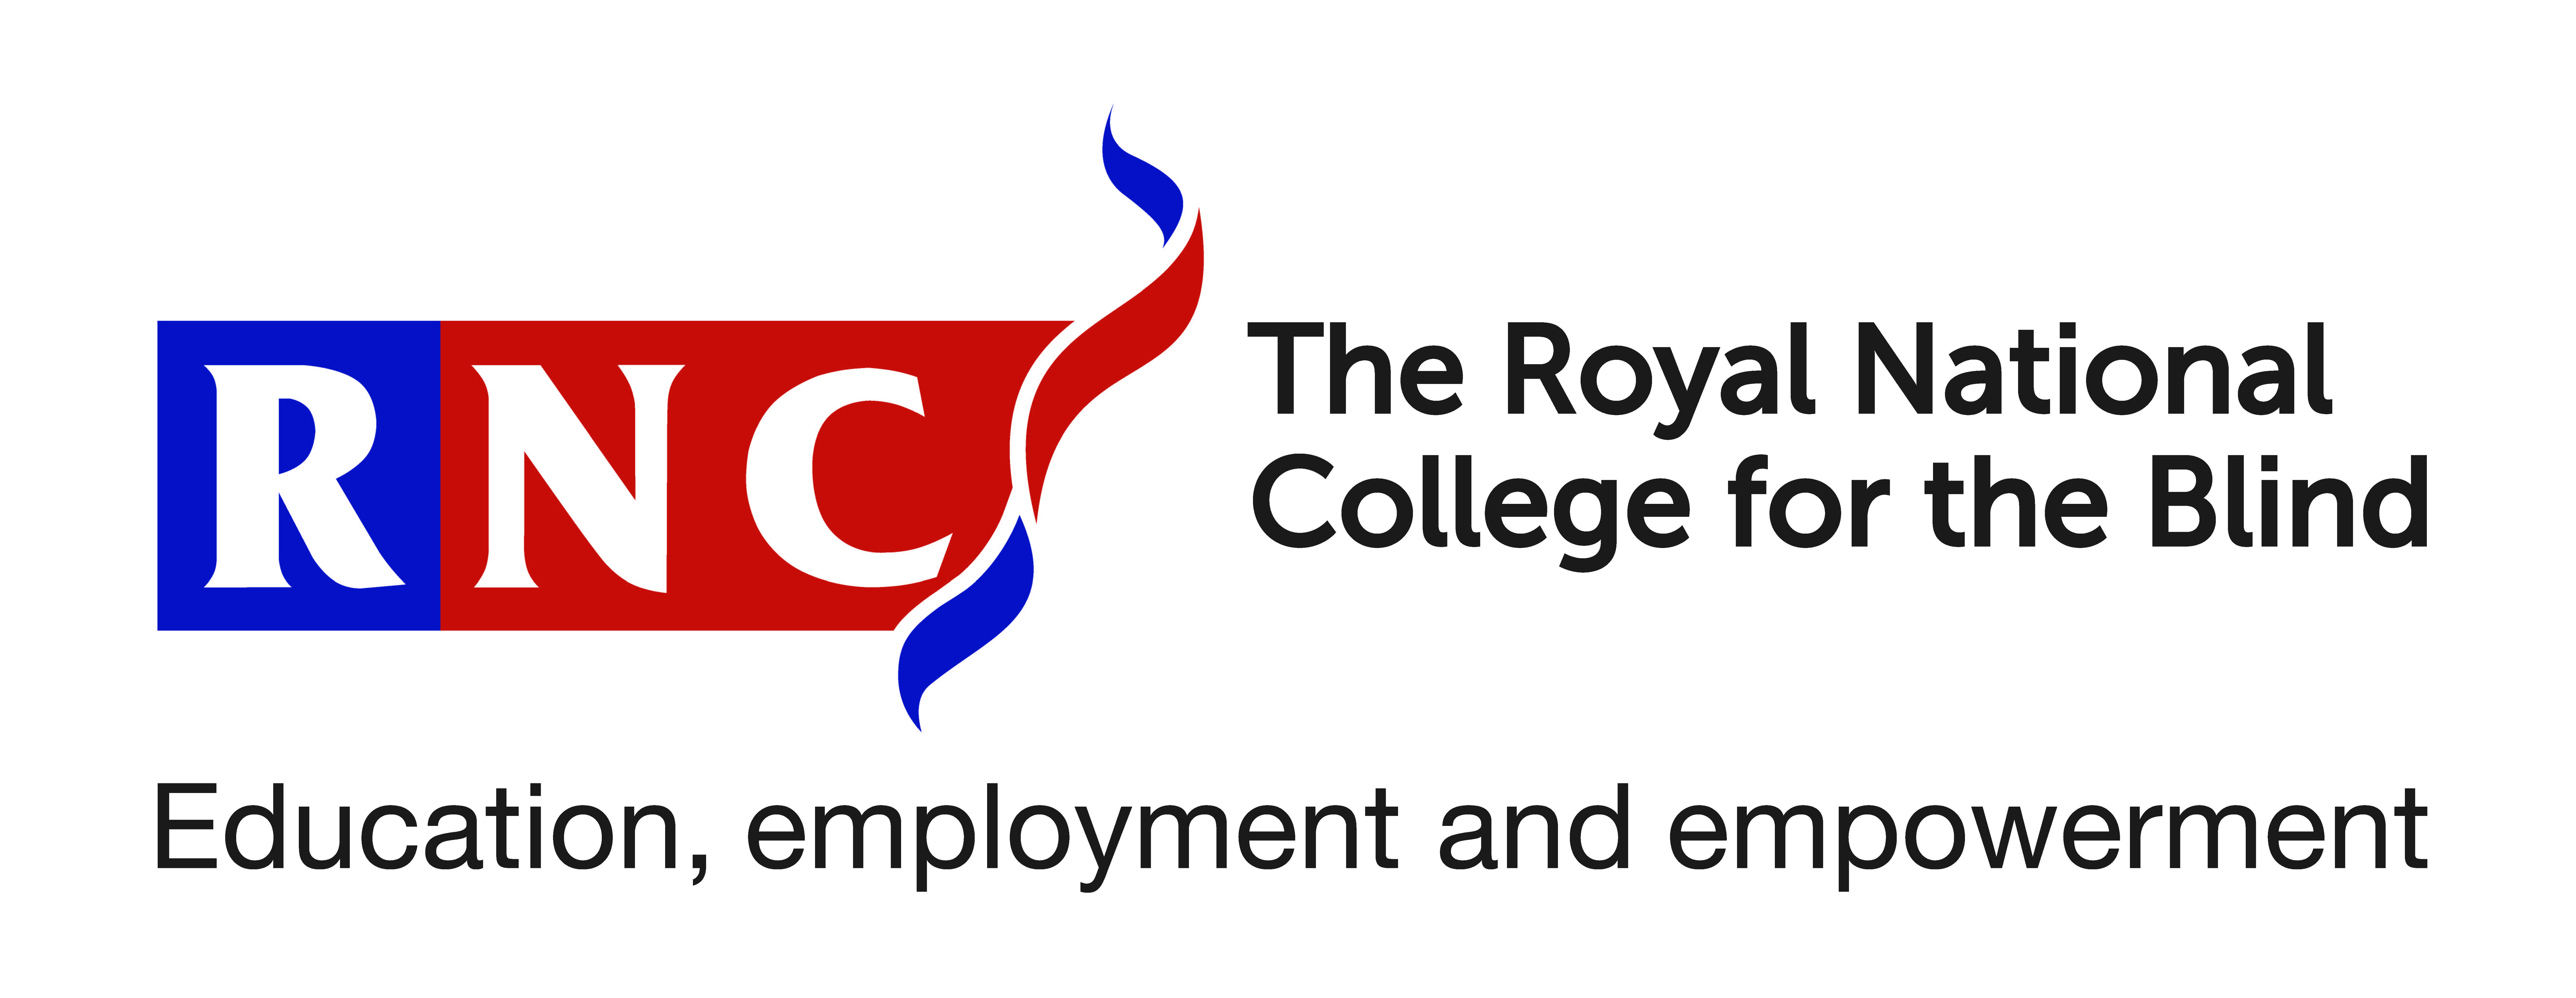 RNC is written in white on a blue and red background with a ribbon flourish. The Royal National College for the Blind is written in full along with it's tagline 'education, employment and empowerment'